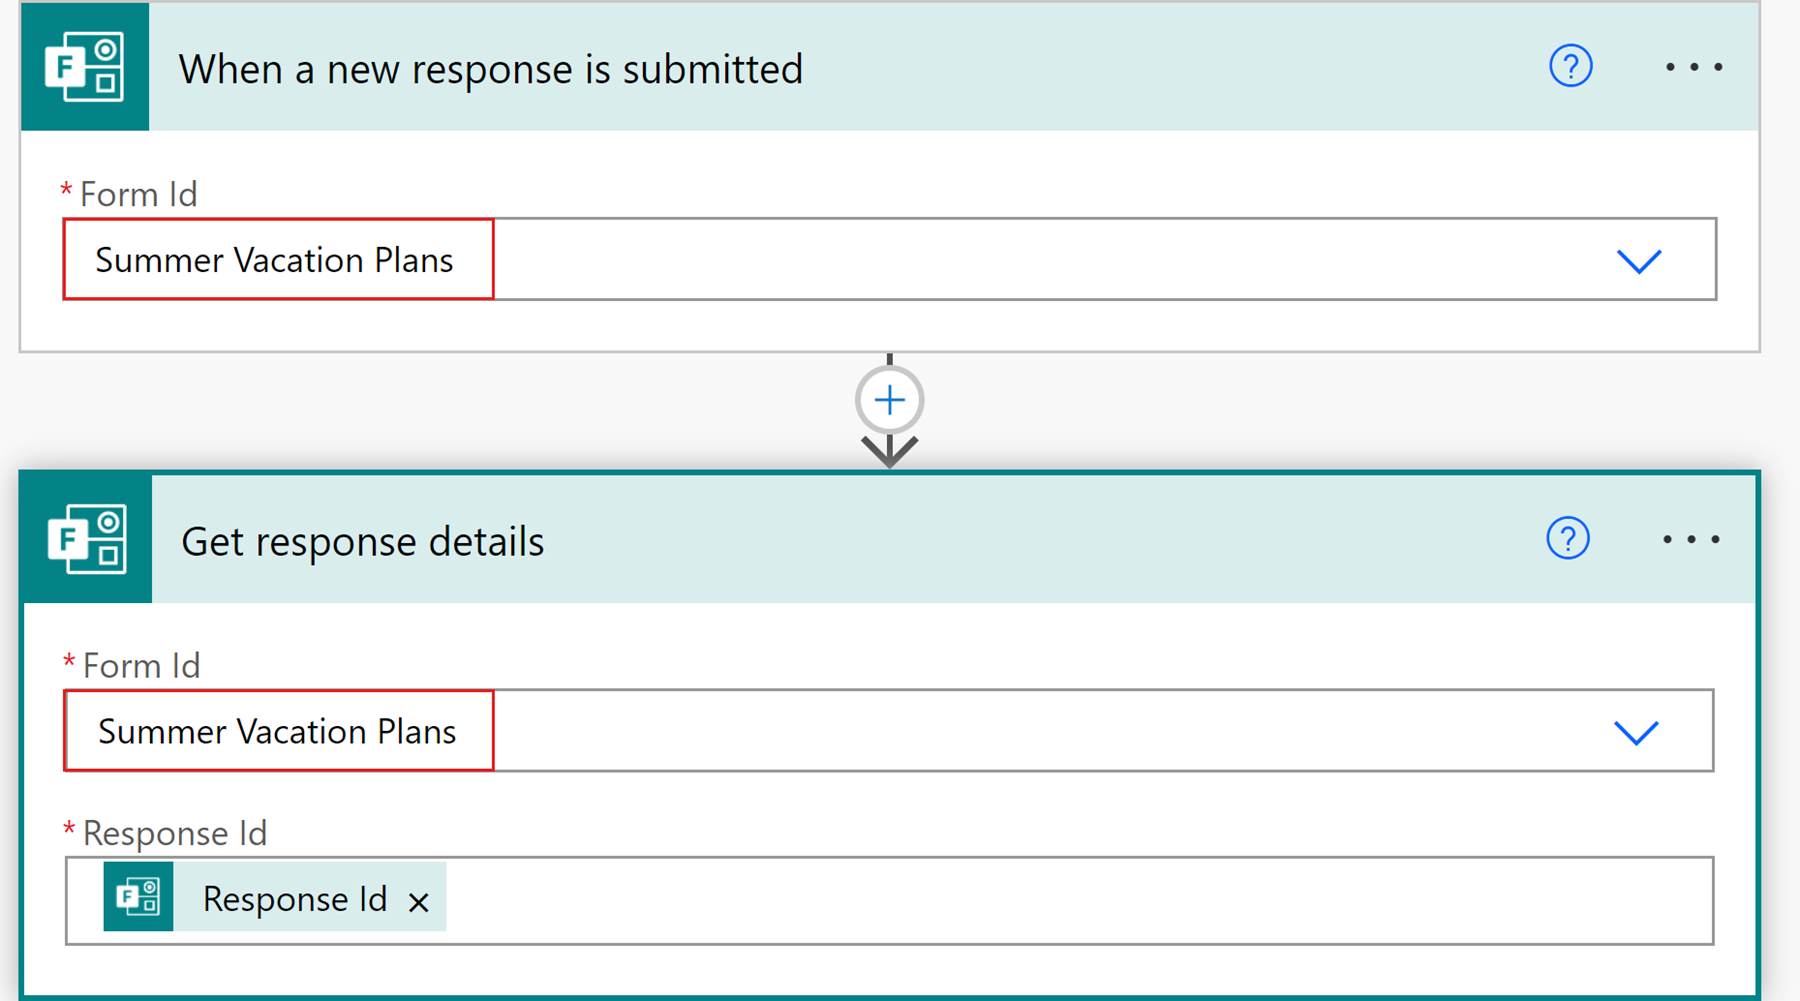 Screenshot of a Forms trigger and action in a flow under construction, with the form ID highlighted in each.